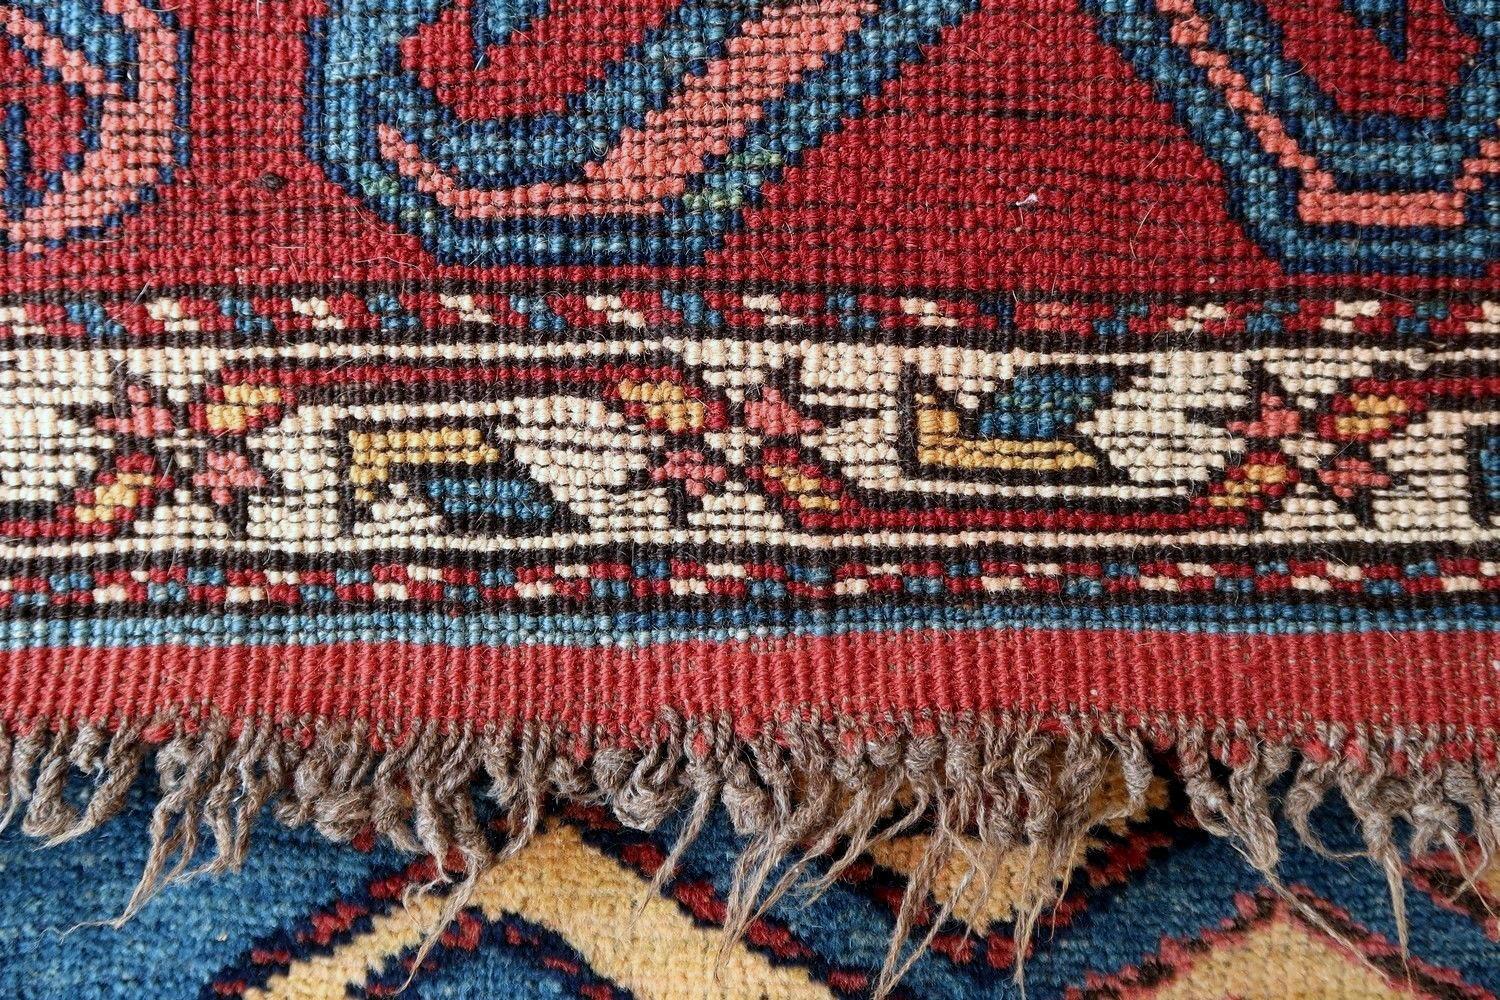 Antique Kurdish runner from Middle East in colorful shades. The rug is from the end of 19th century in original good condition.

-condition: original good,

-circa: 1880s,

-size: 2.6' x 9.6' (80cm x 292cm),

-material: wool,

-country of